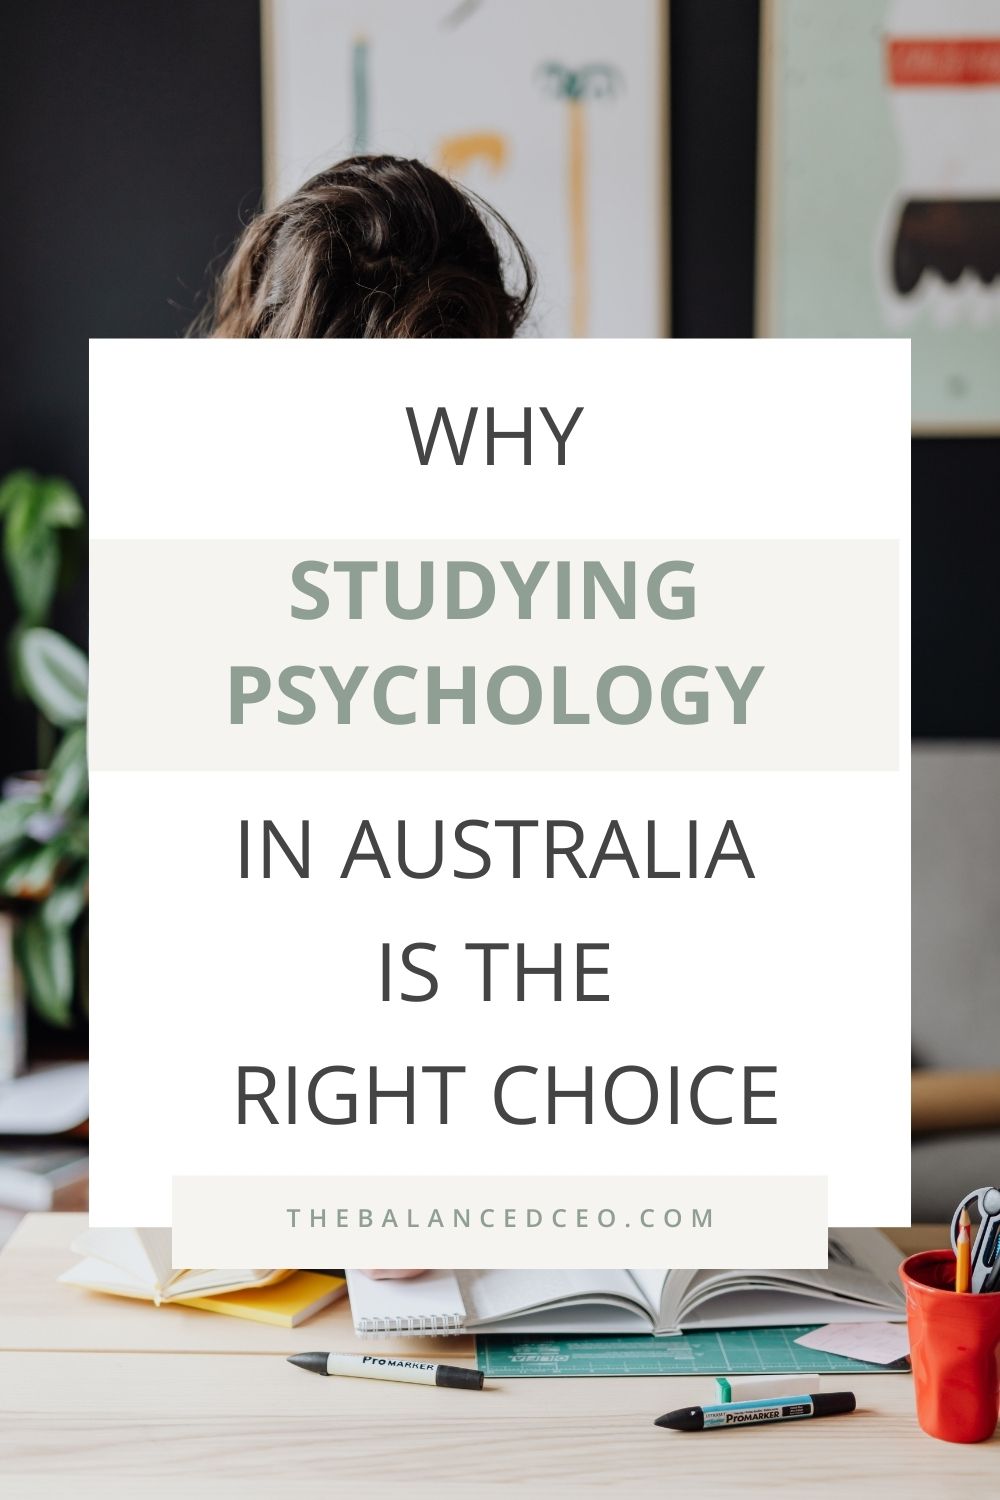 Why Studying Psychology in Australia is the Right Choice